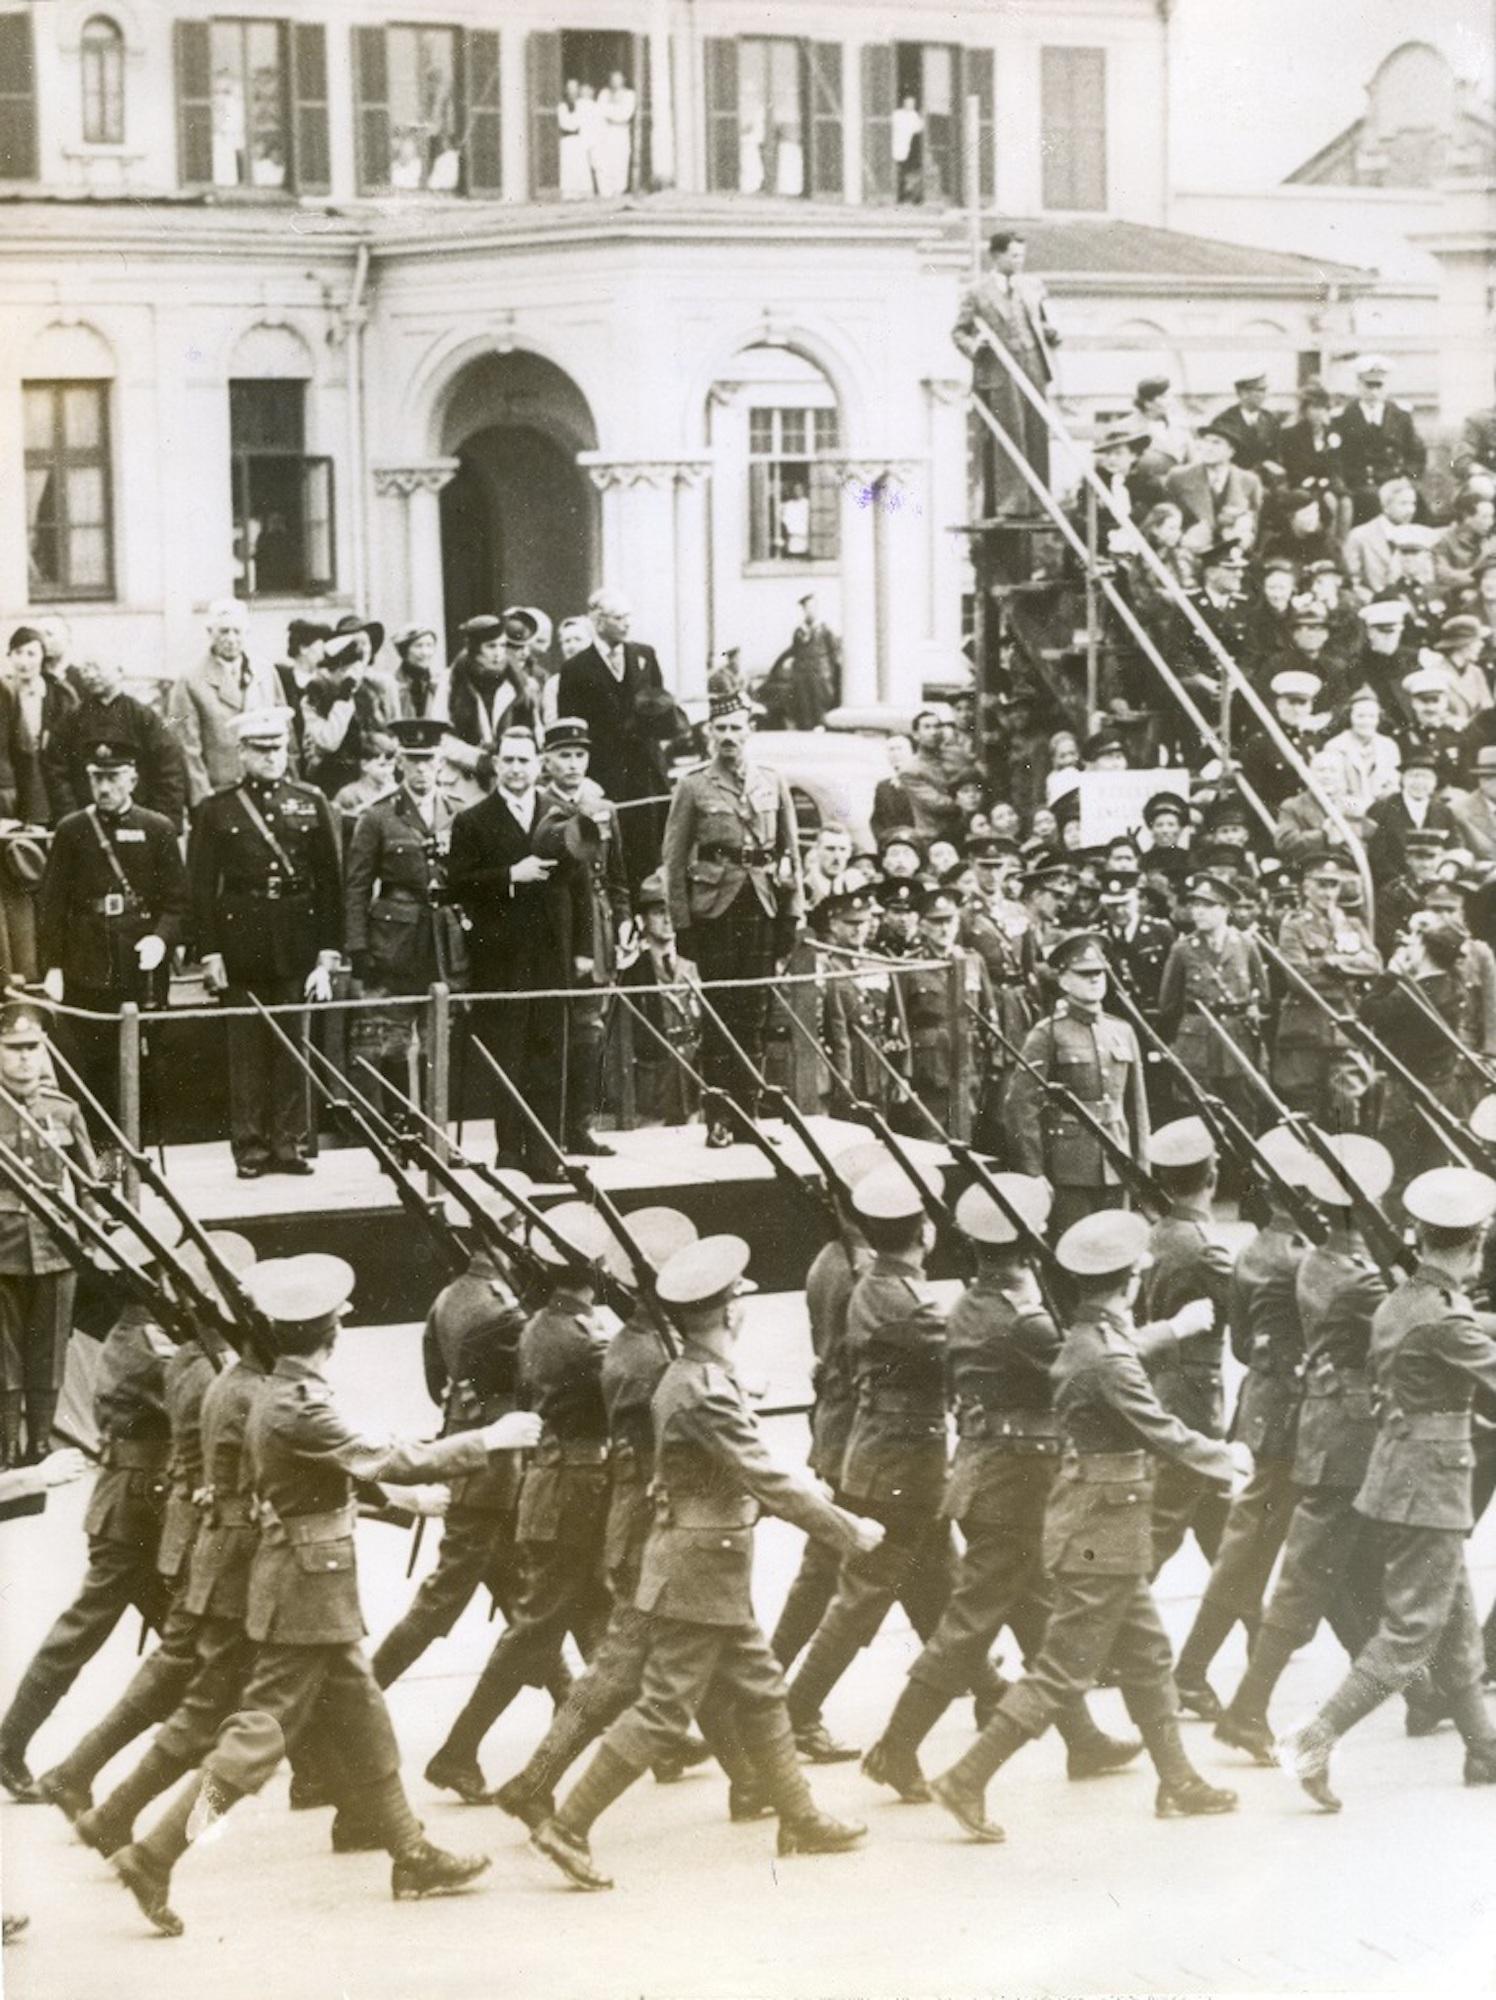 Unknown Black and White Photograph - Paramilitary Procession in Shanghai - Vintage Photo 1939